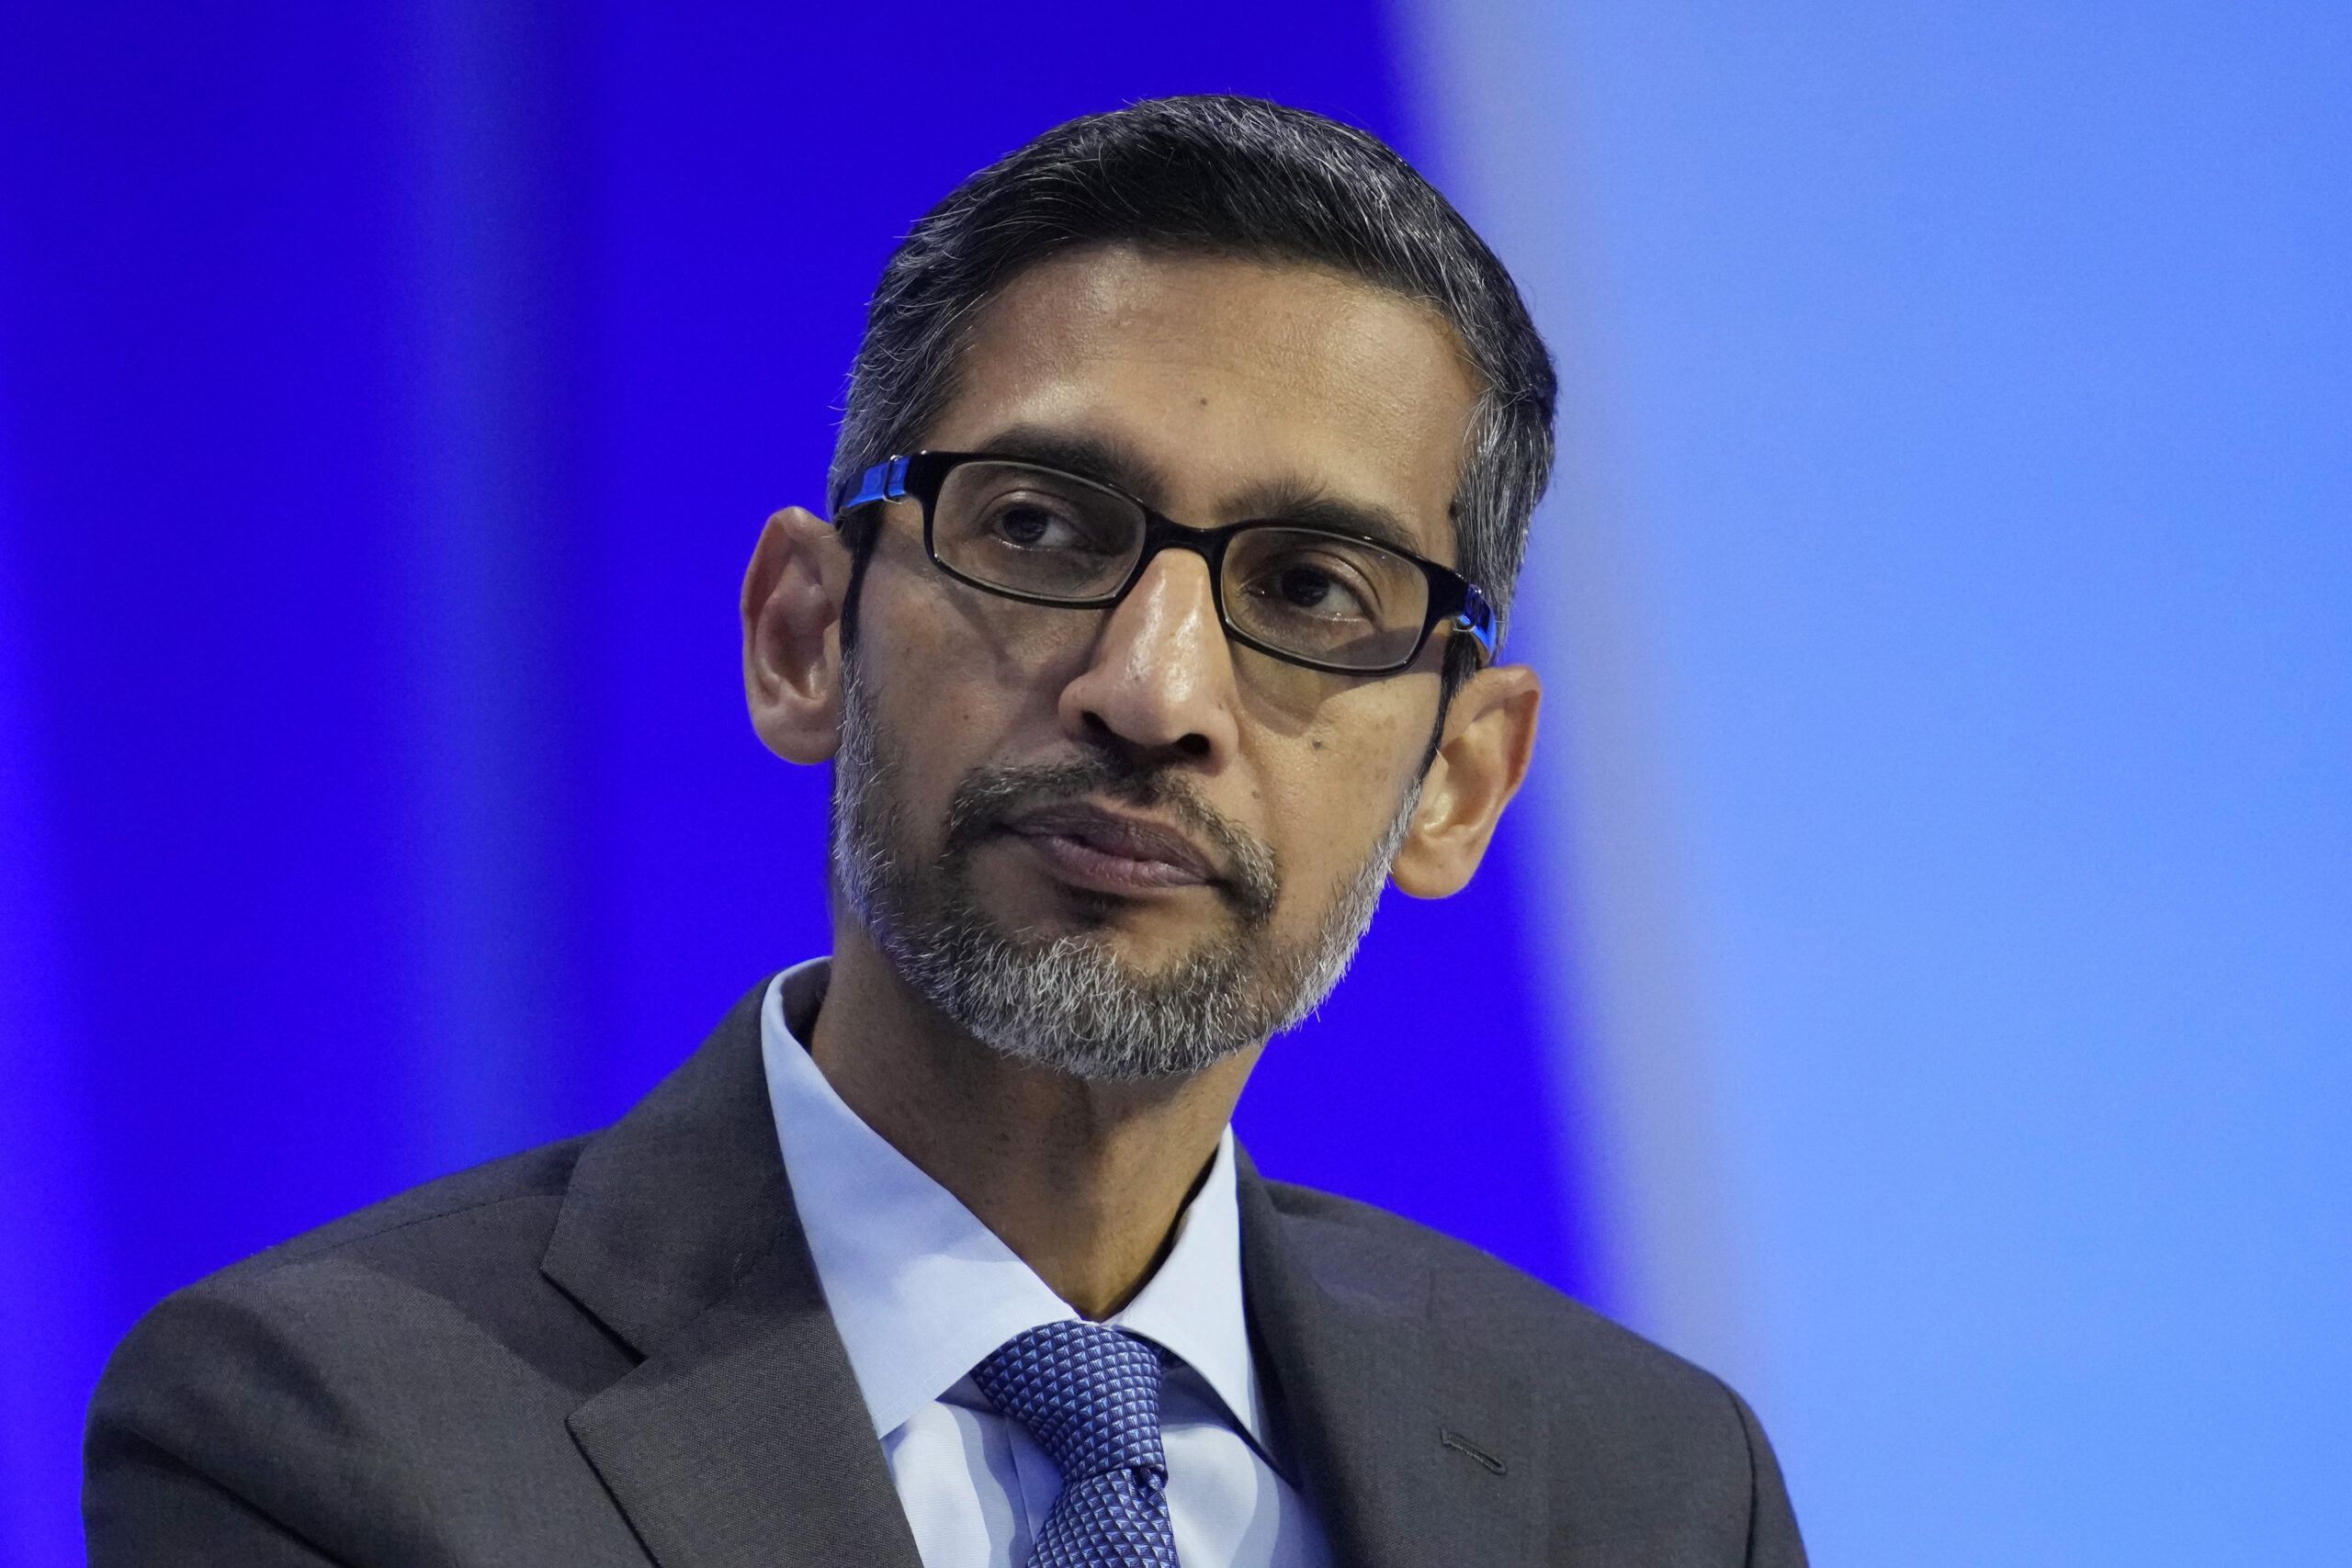 File - Sundar Pichai, CEO of Google and Alphabet, takes part in a discussion at the Asia-Pacific Ec...